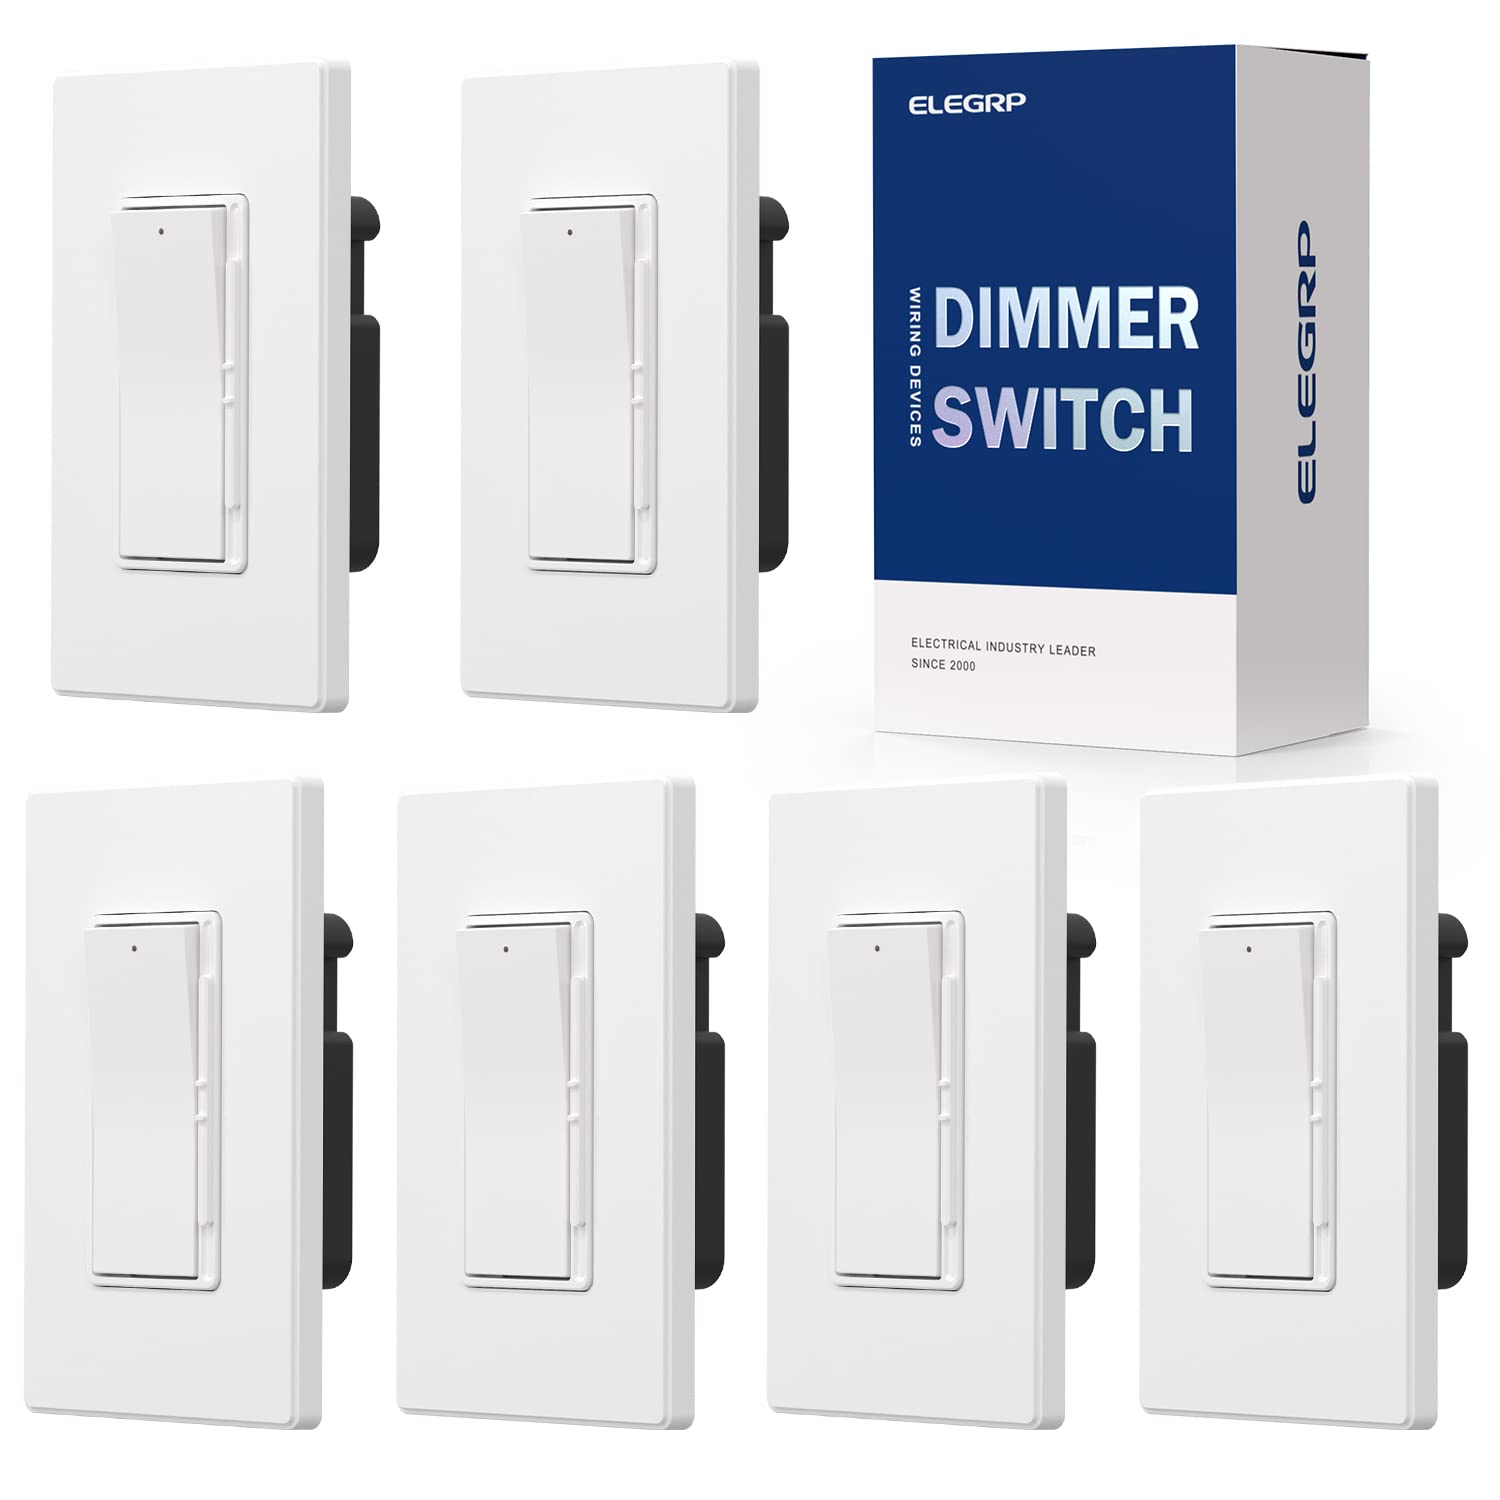 ELEGRP Digital Dimmer Light Switch for 300W Dimmable [...]